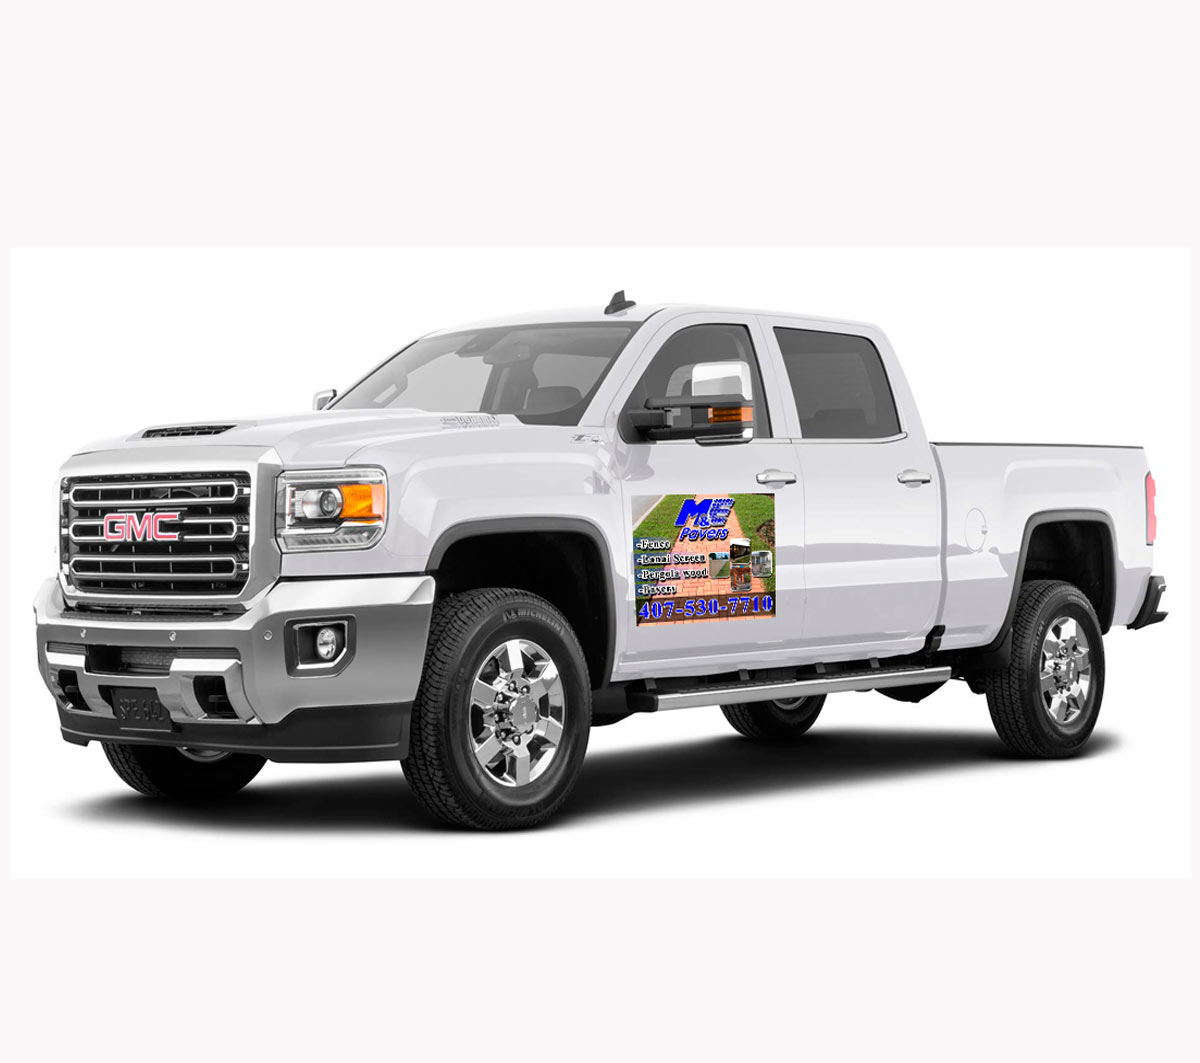 Buy any two different magnets and get one magnet free Chevrolet magnet 